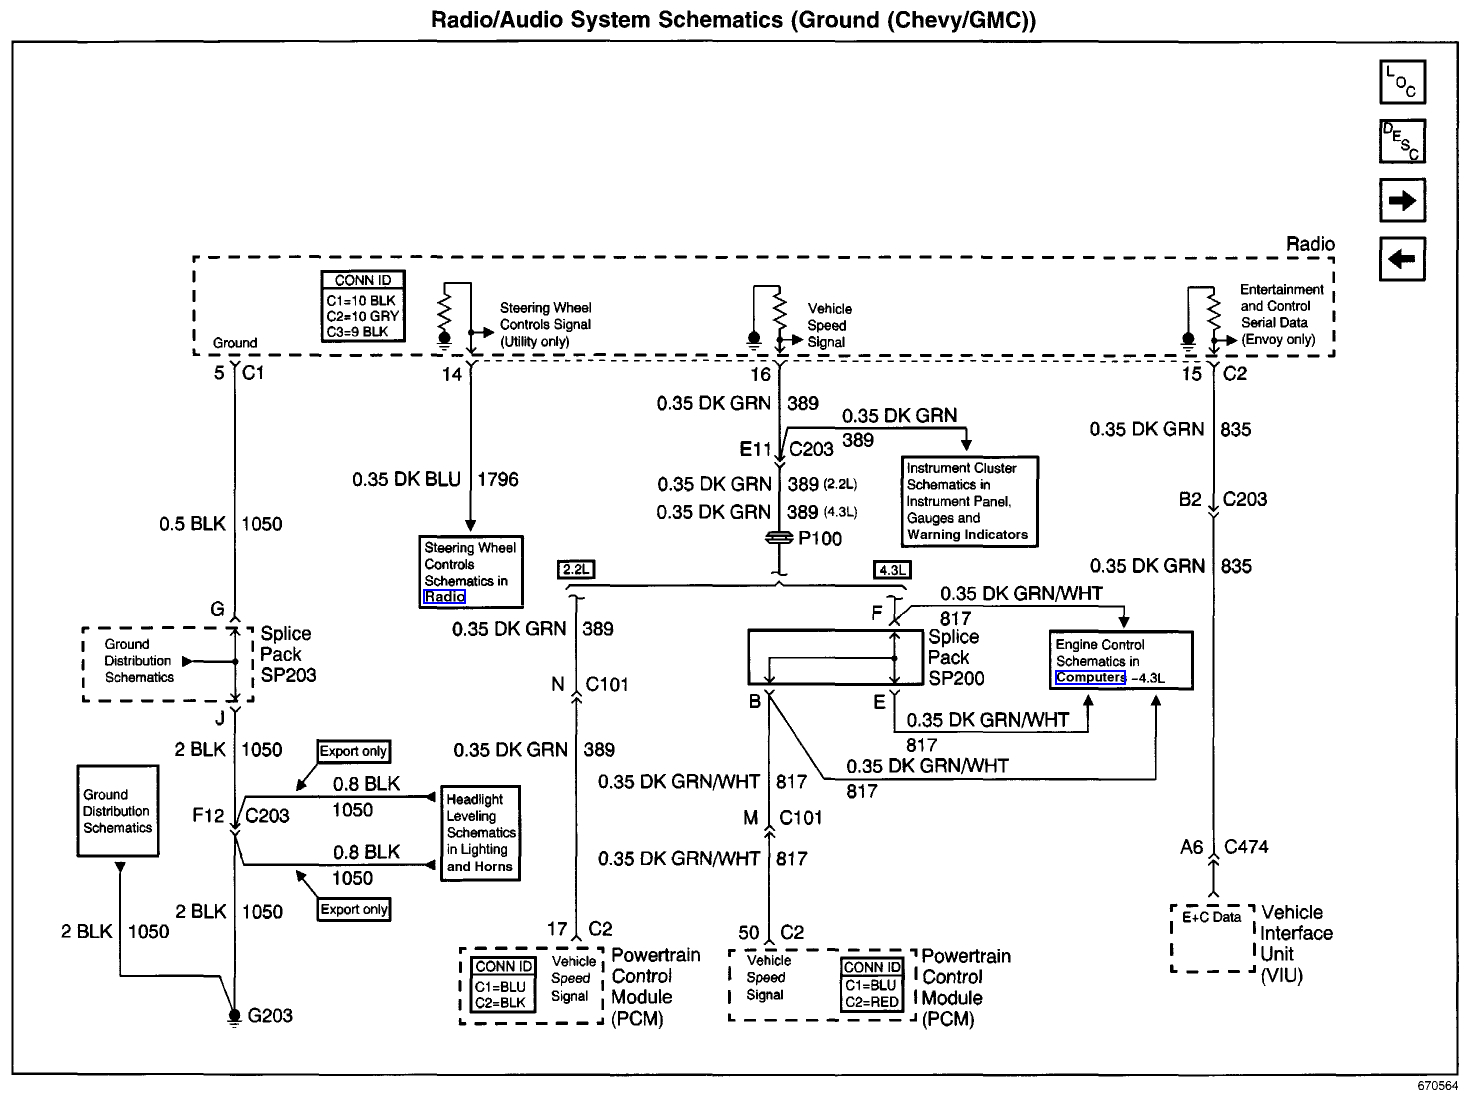 Radio Diagram Needed: I Need a Diagram of the Wires From the Radio...